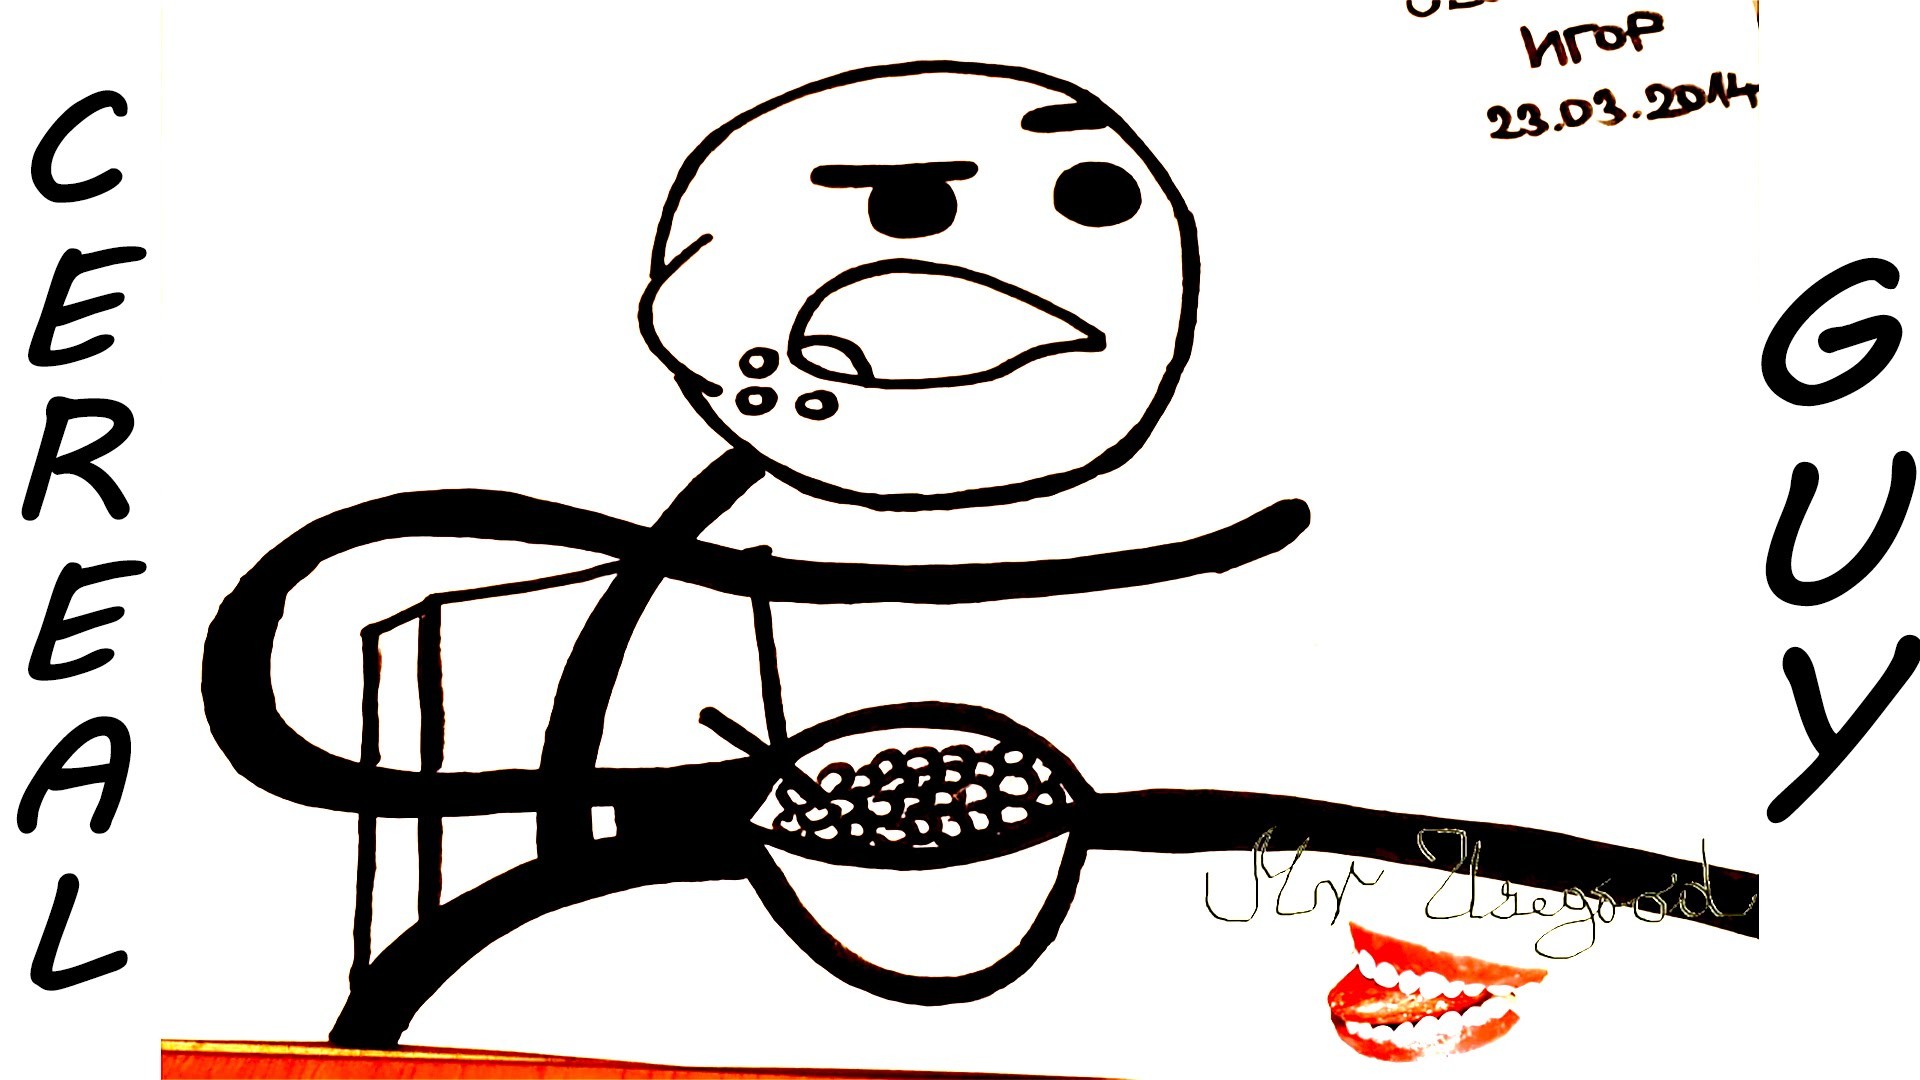 DIY How to draw Meme Faces Step by Step - Memes: draw CEREAL Guy Meme